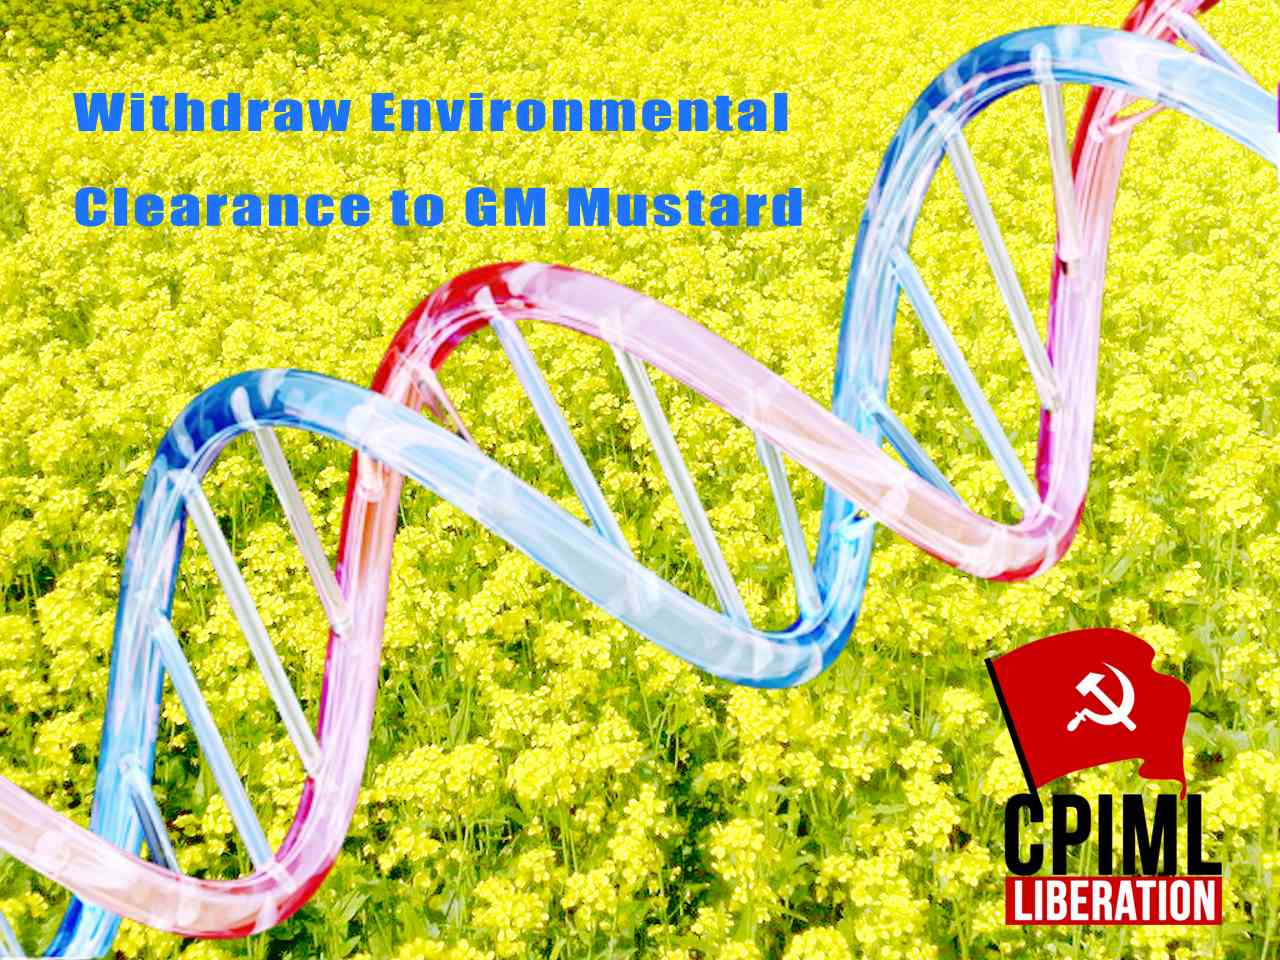 Withdraw Environmental Clearance to GM Mustard